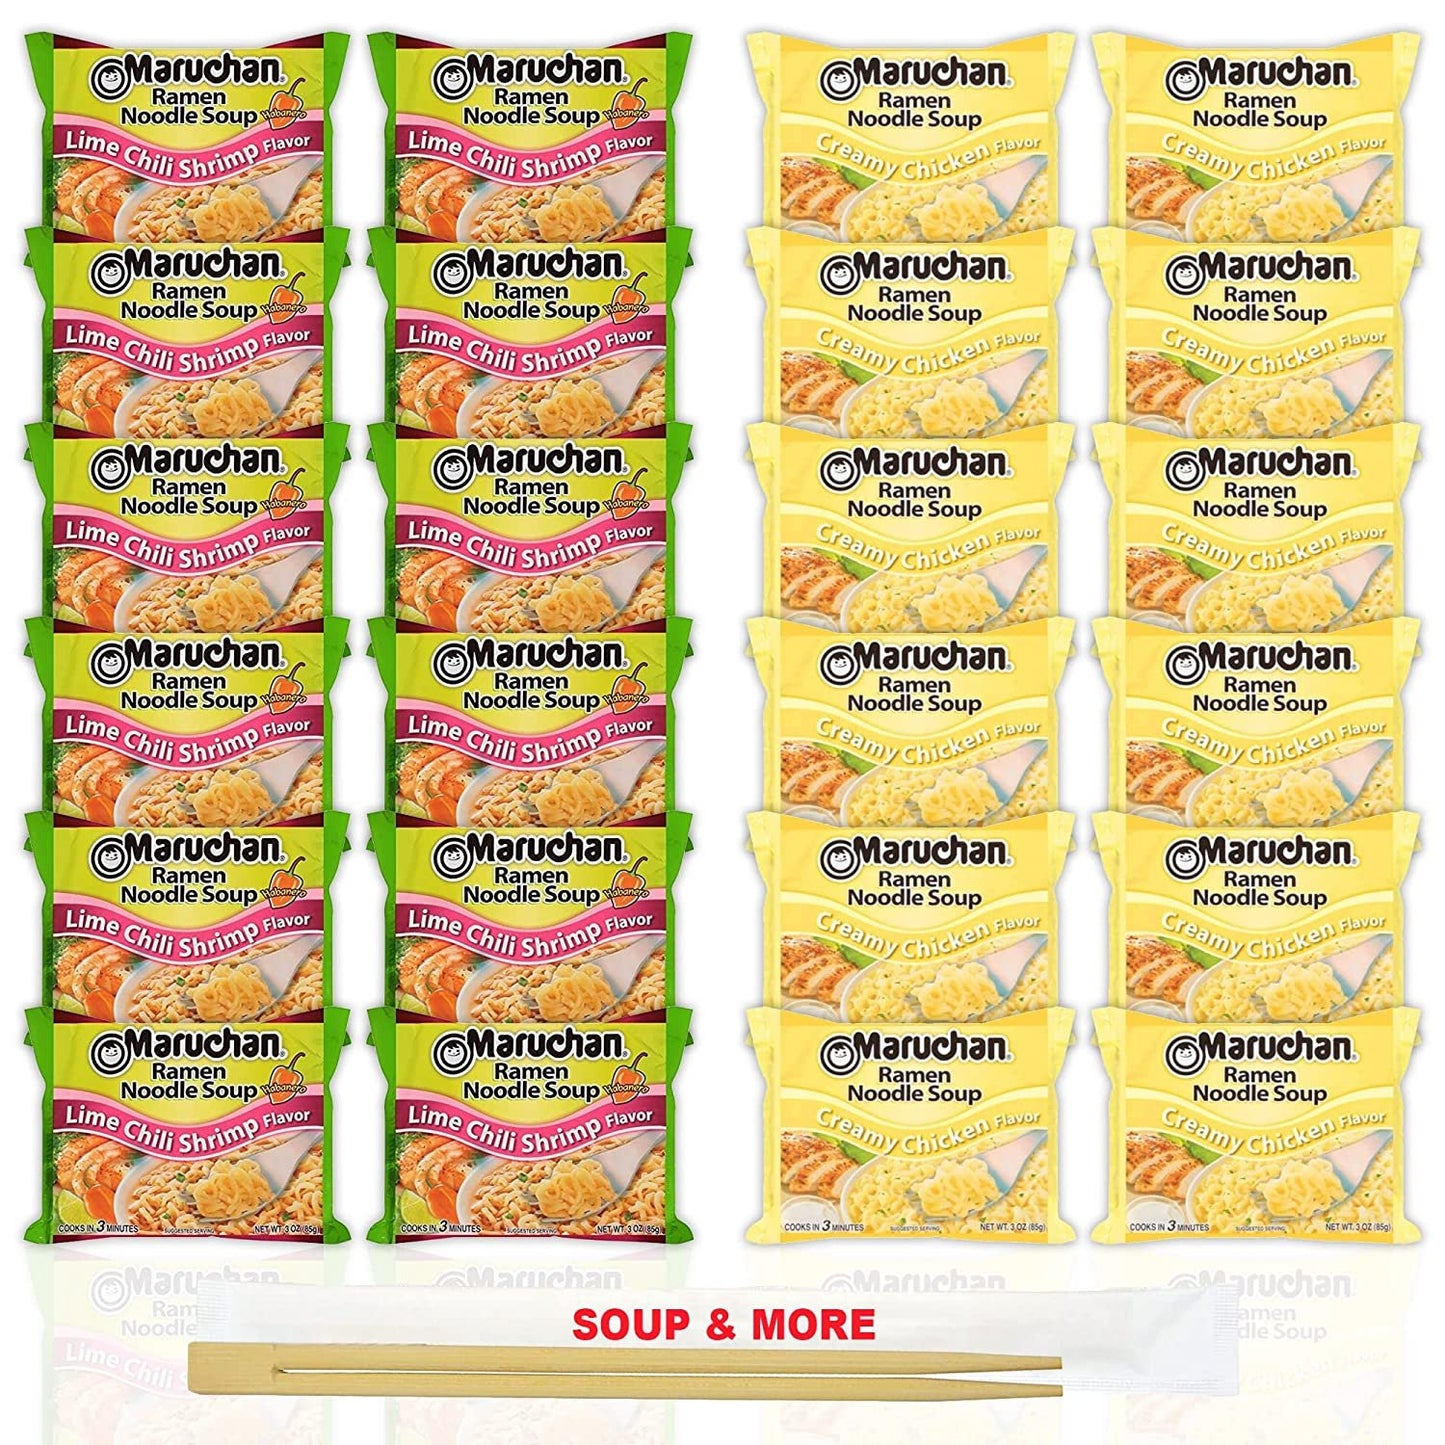 Maruchan Ramen Instant Noodle Soup Variety, 2 Flavors - 12 Packs Lime Chili Shrimp & 12 Packs Creamy Chicken , 3 Ounce Single Servings Lunch / Dinner Variety